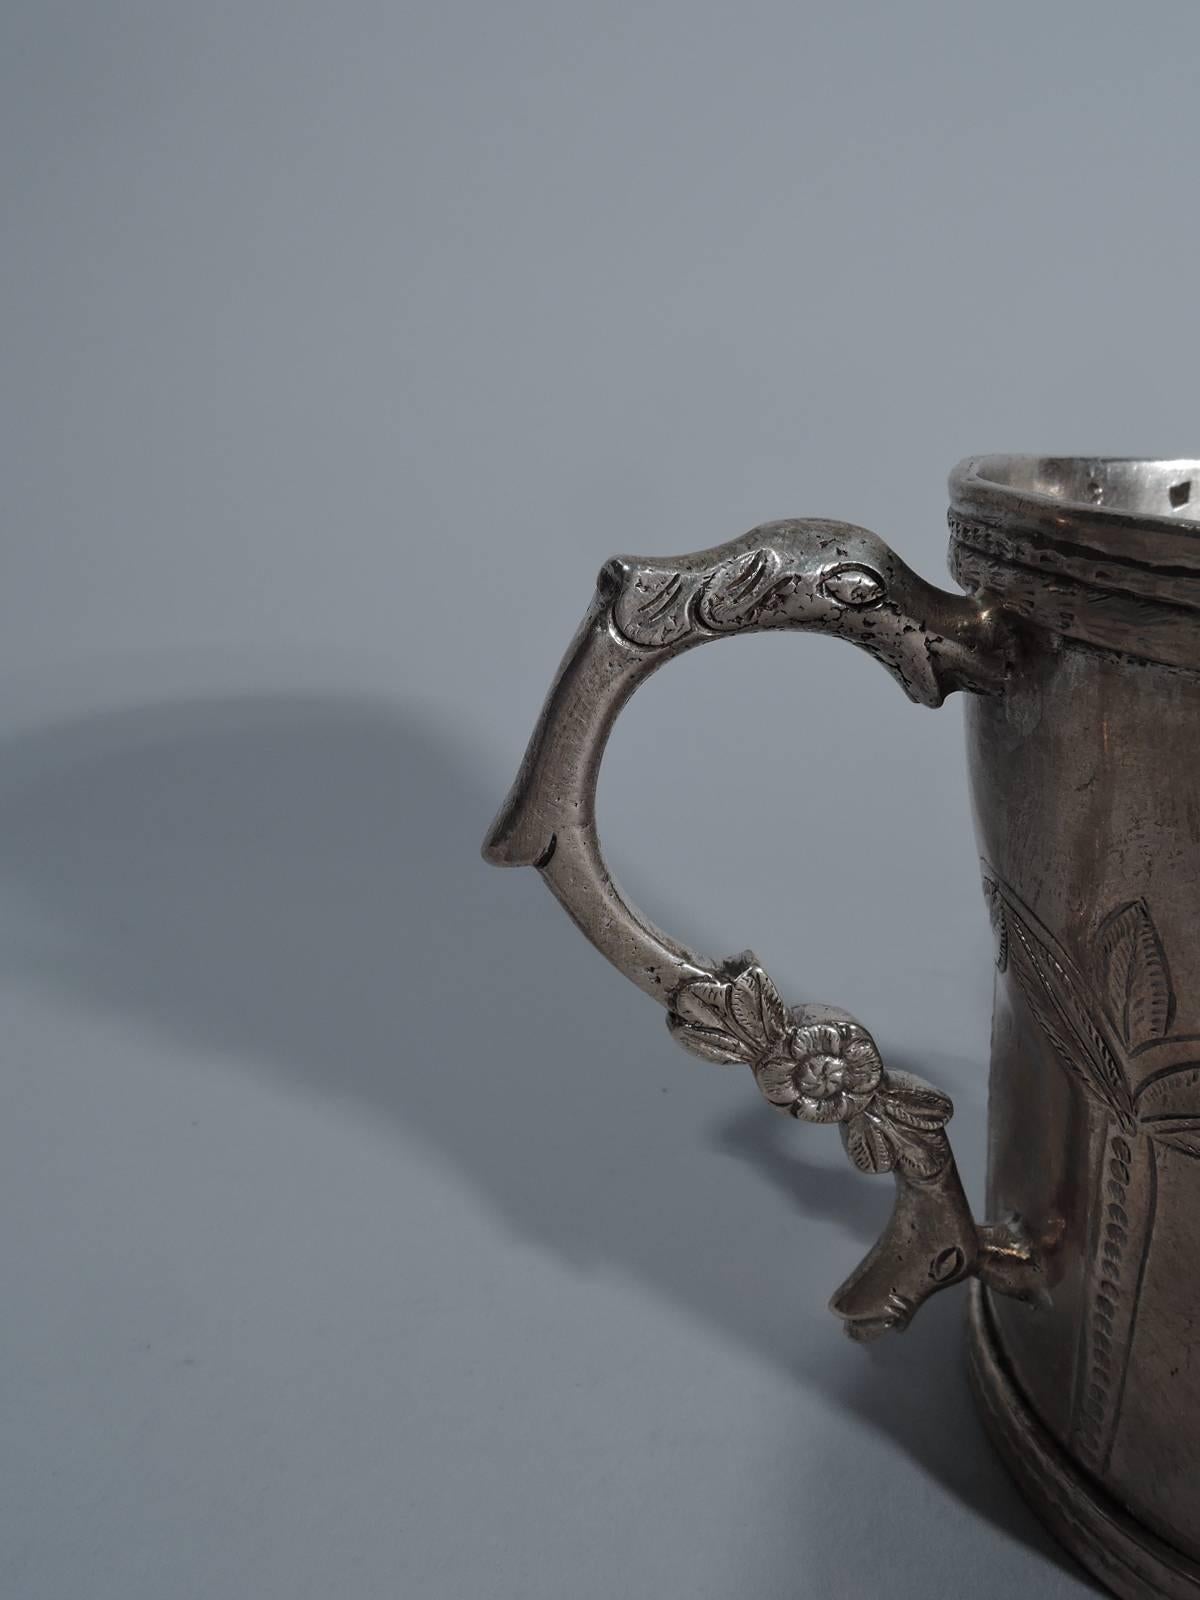 Spanish Colonial Antique South American Silver Mug with Palm Tree Arcade